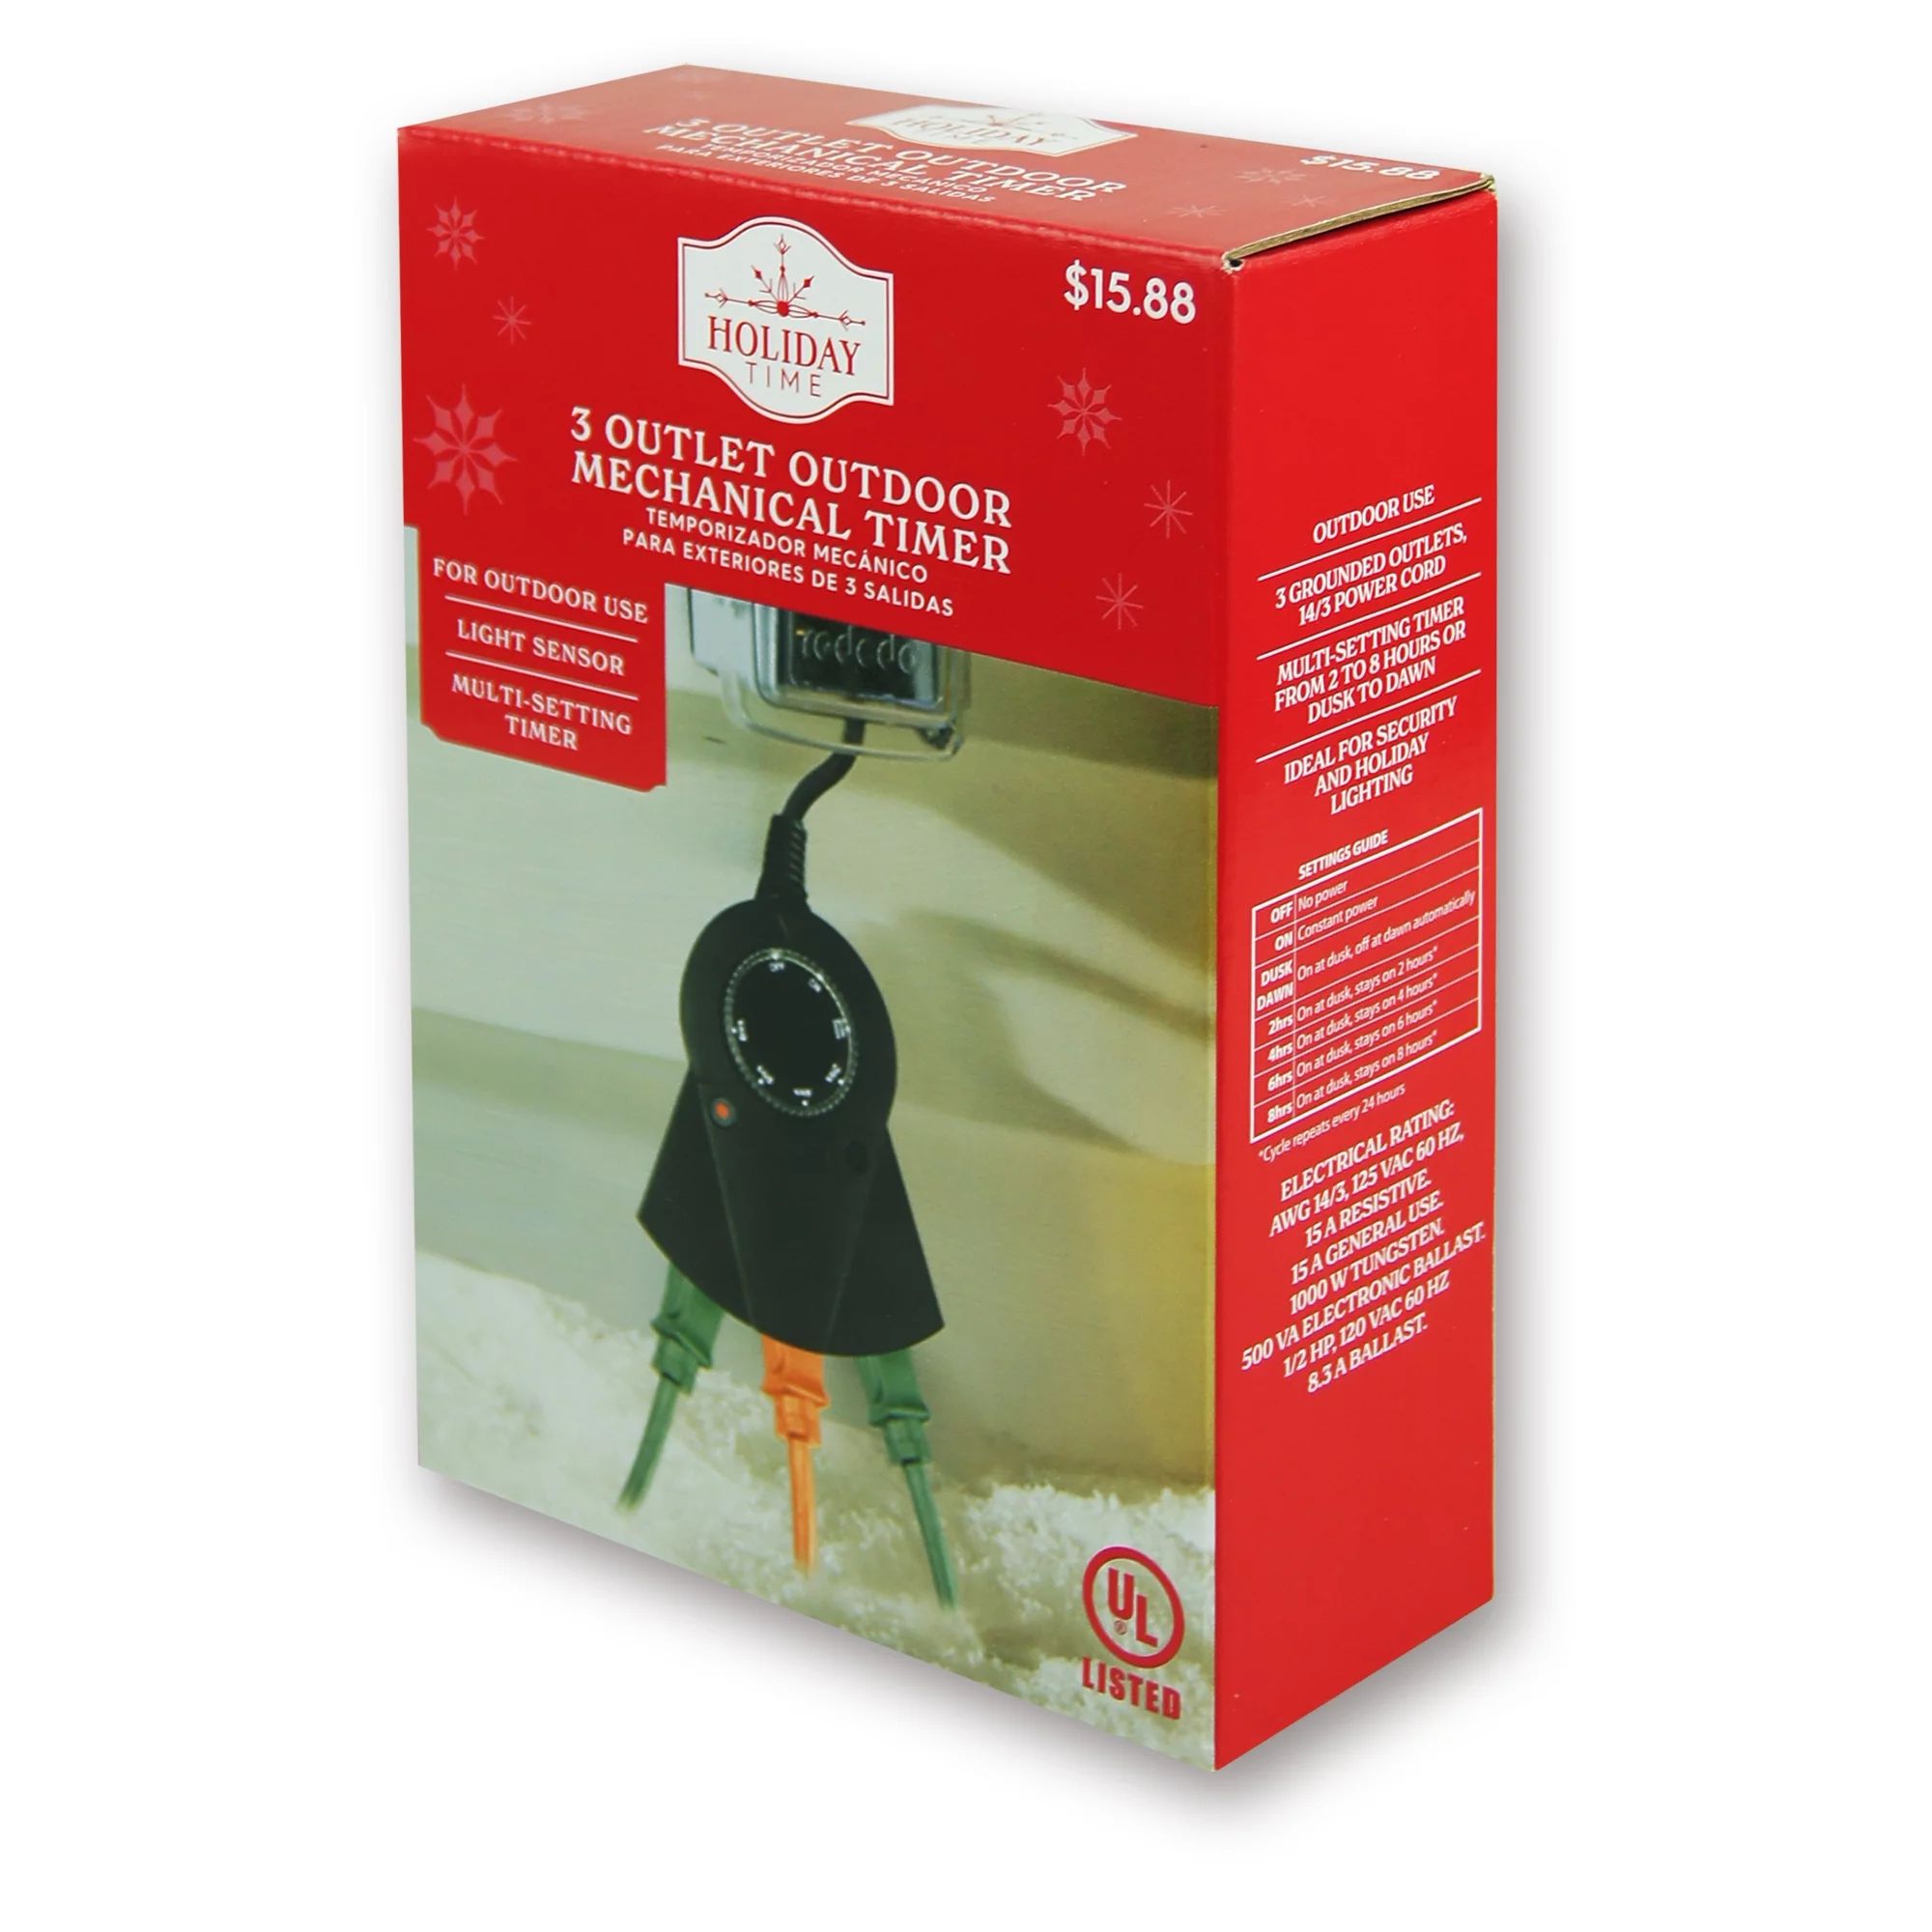 Outdoor Christmas Light 3-Outlet Mechanical Timer, Black, by Holiday Time | Walmart (US)